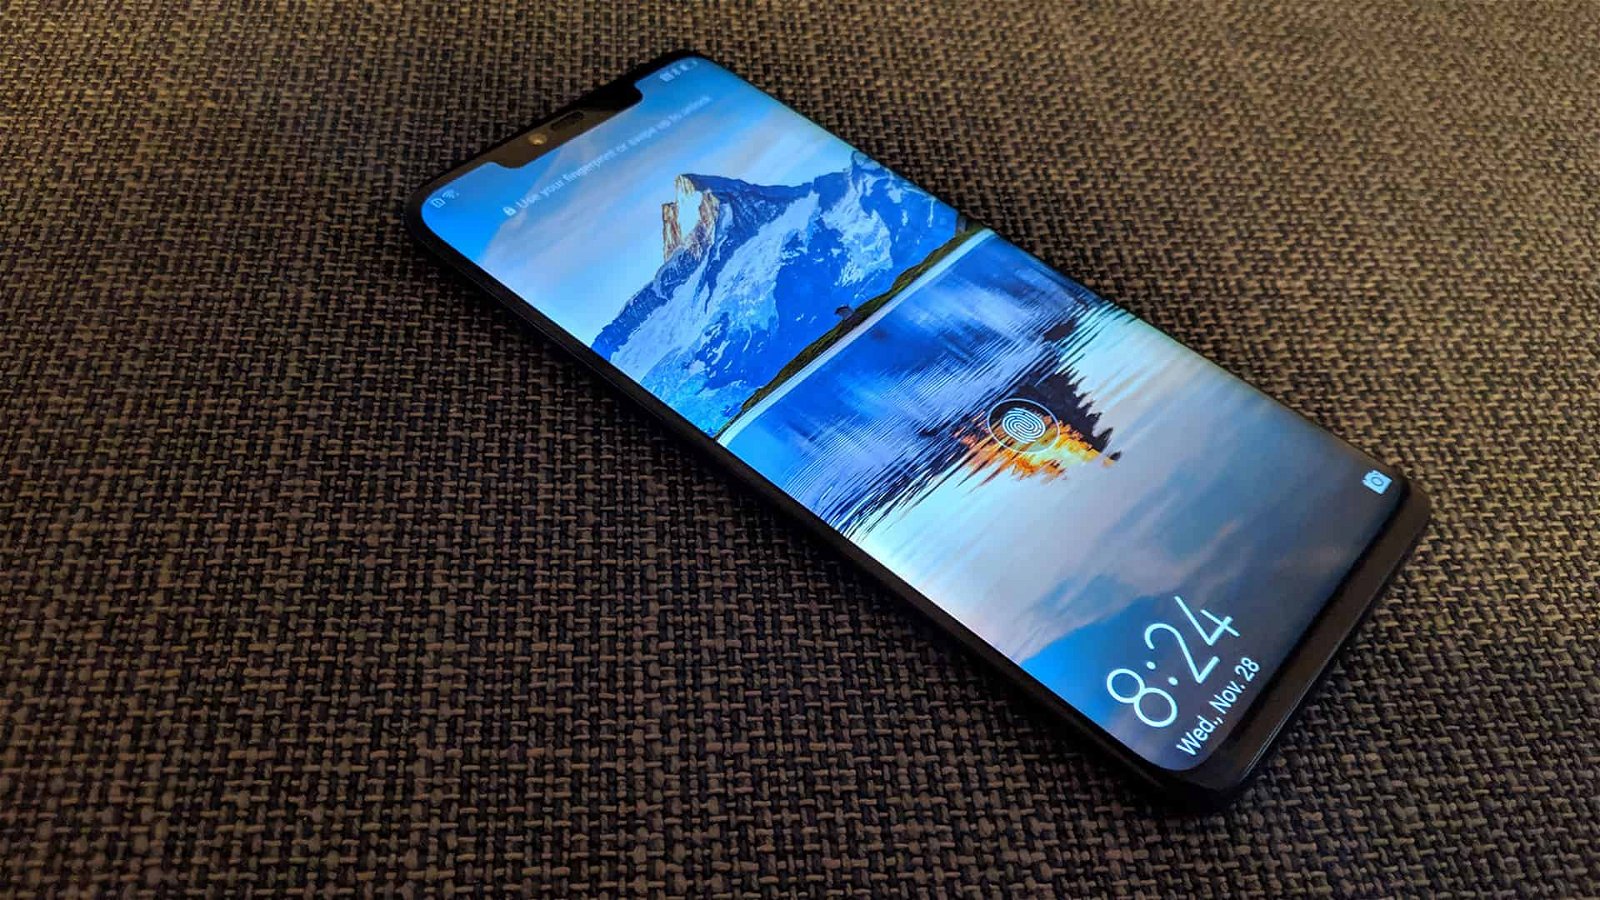 Huawei Mate 20 Pro (Smartphone) Review 4